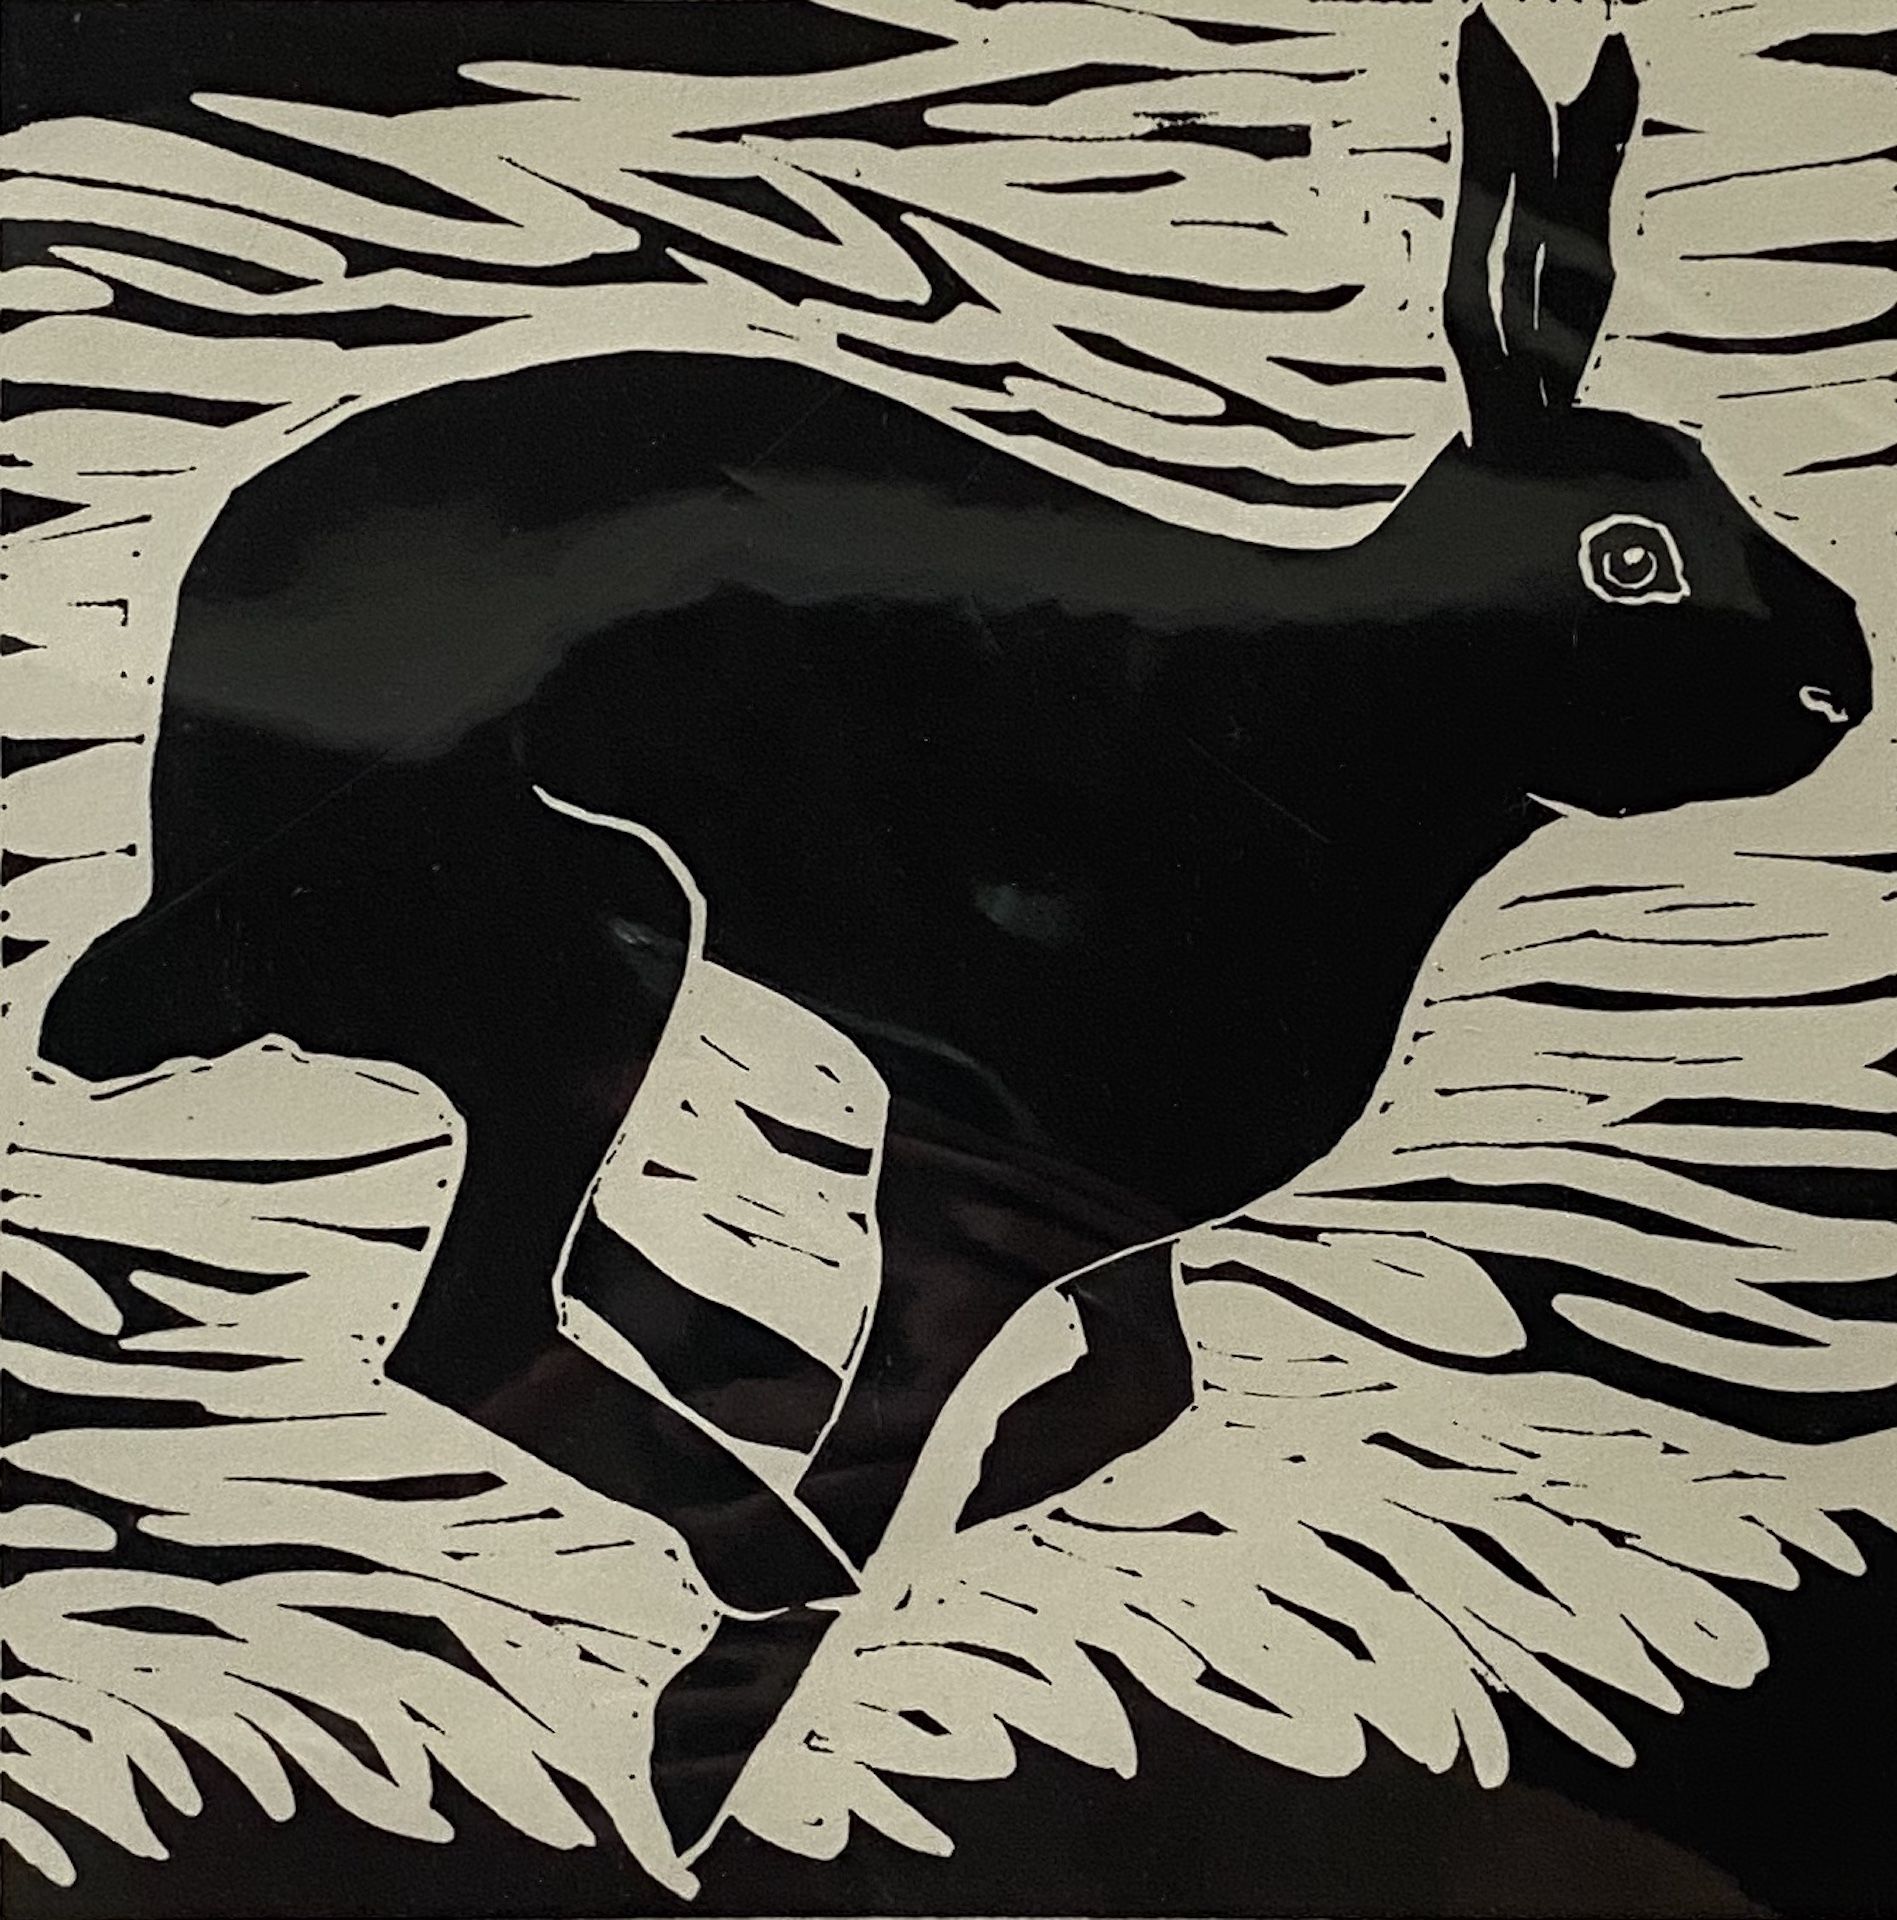 Go Faster Hare by Rosemary Farrer